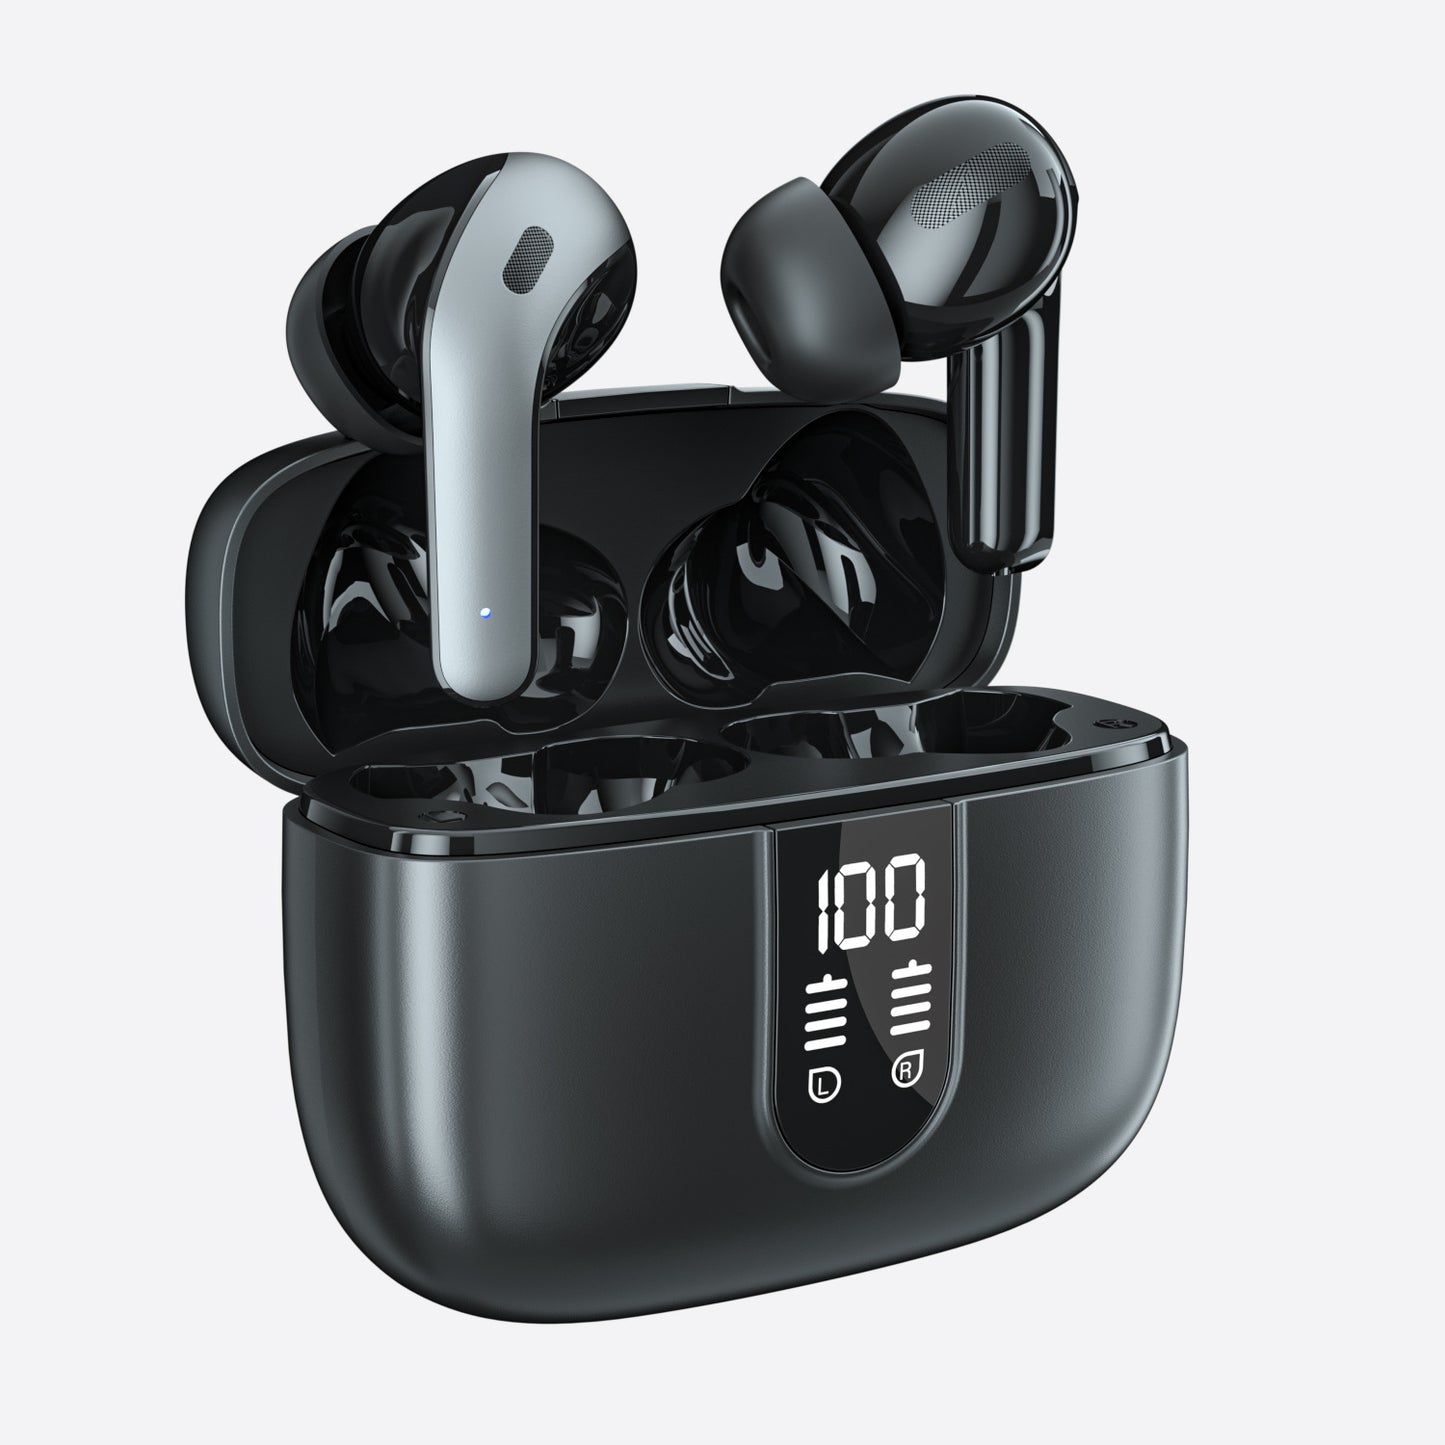 GM X08 Bluetooth Headphones True Wireless Earbuds 60H Playback LED Power Display Earphones with Wireless Charging Case IPX5 Waterproof in-Ear Earbuds with Mic for TV Smart Phone Computer Laptop Sports